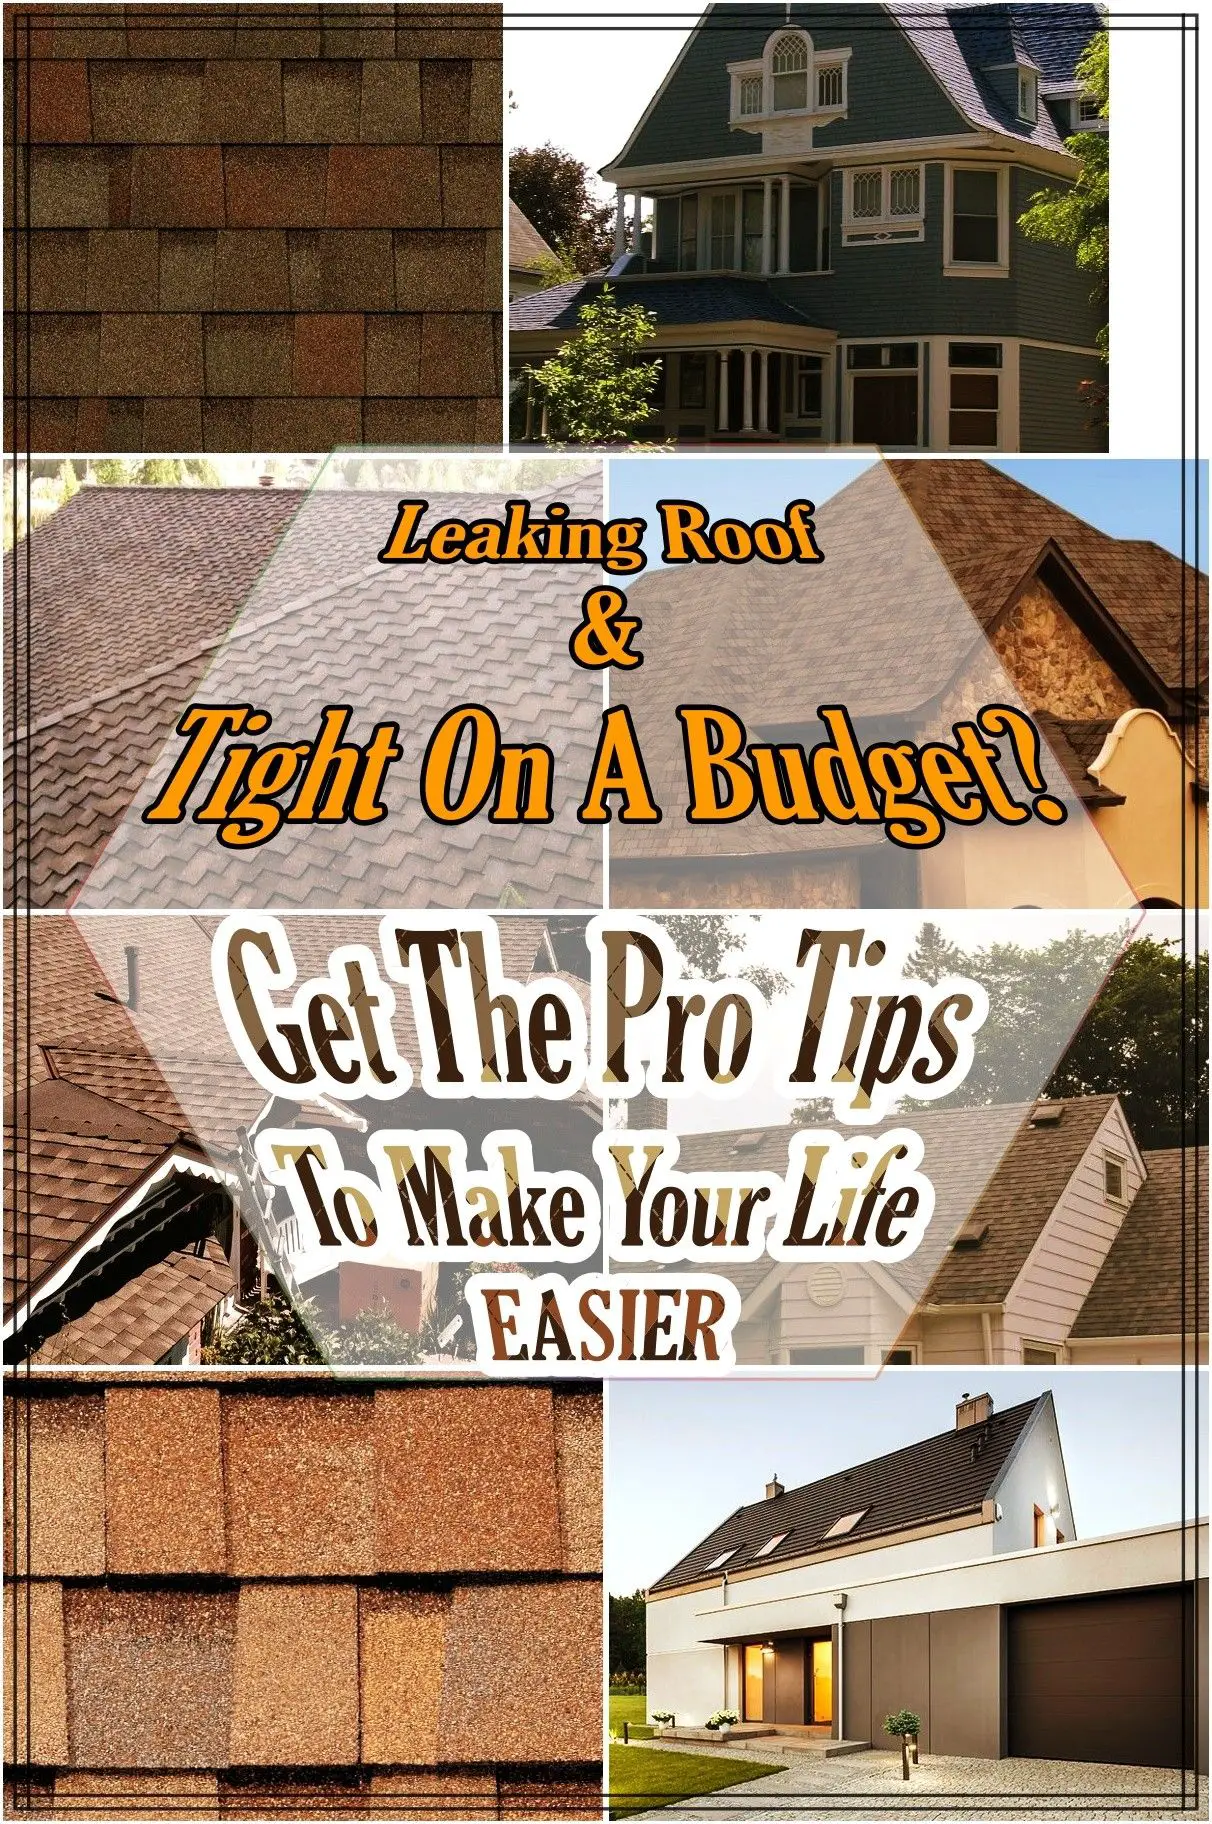 Can I Claim Roof Replacement On Taxes in Getting A New Roof